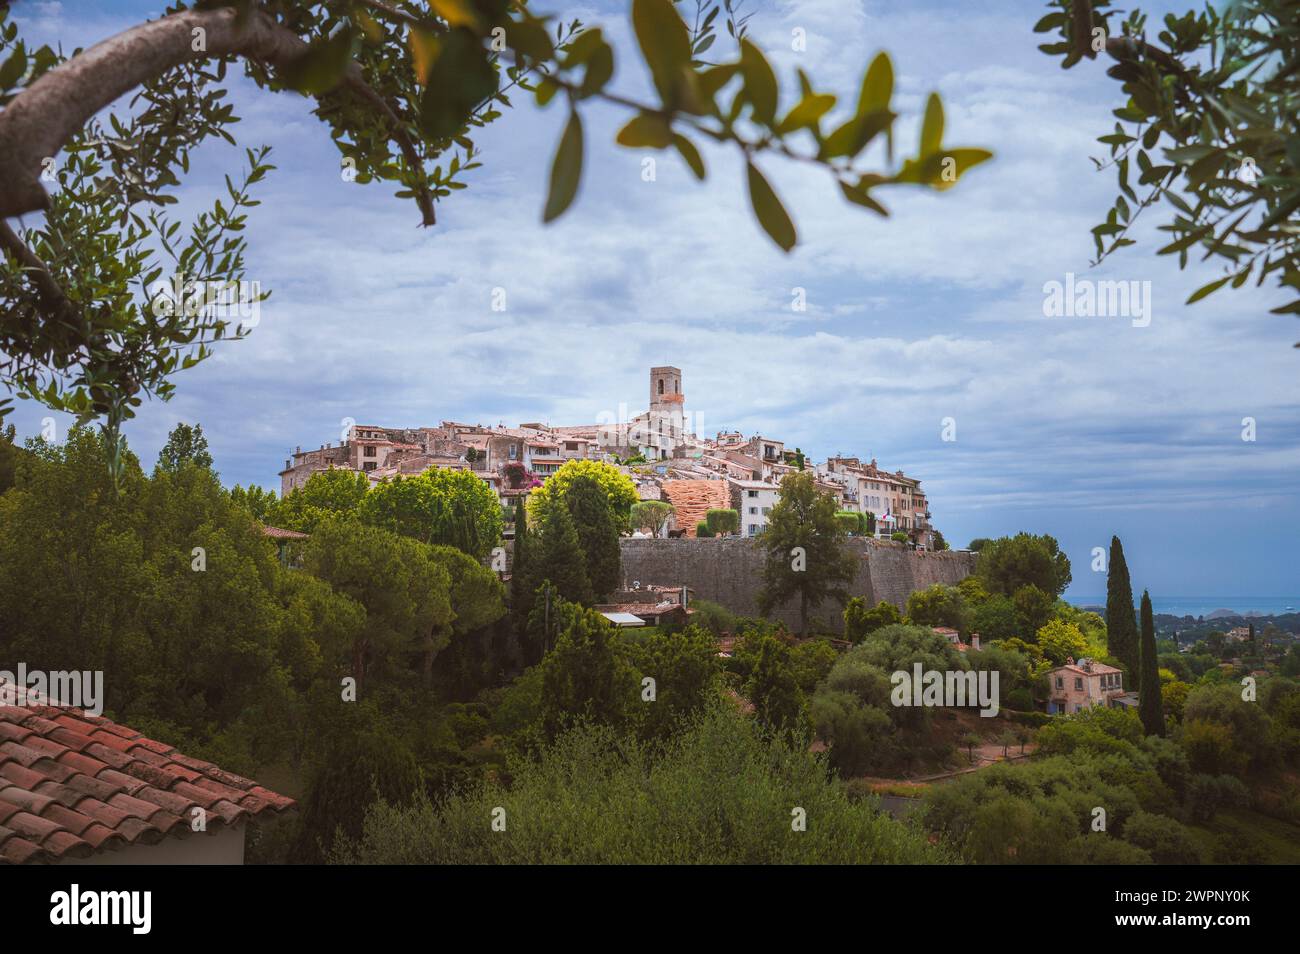 View of the medieval town center of Saint Paul du Vence, Provence-Alpes-Cote d'Azur in southern France framed by olive branches in the foreground Stock Photo